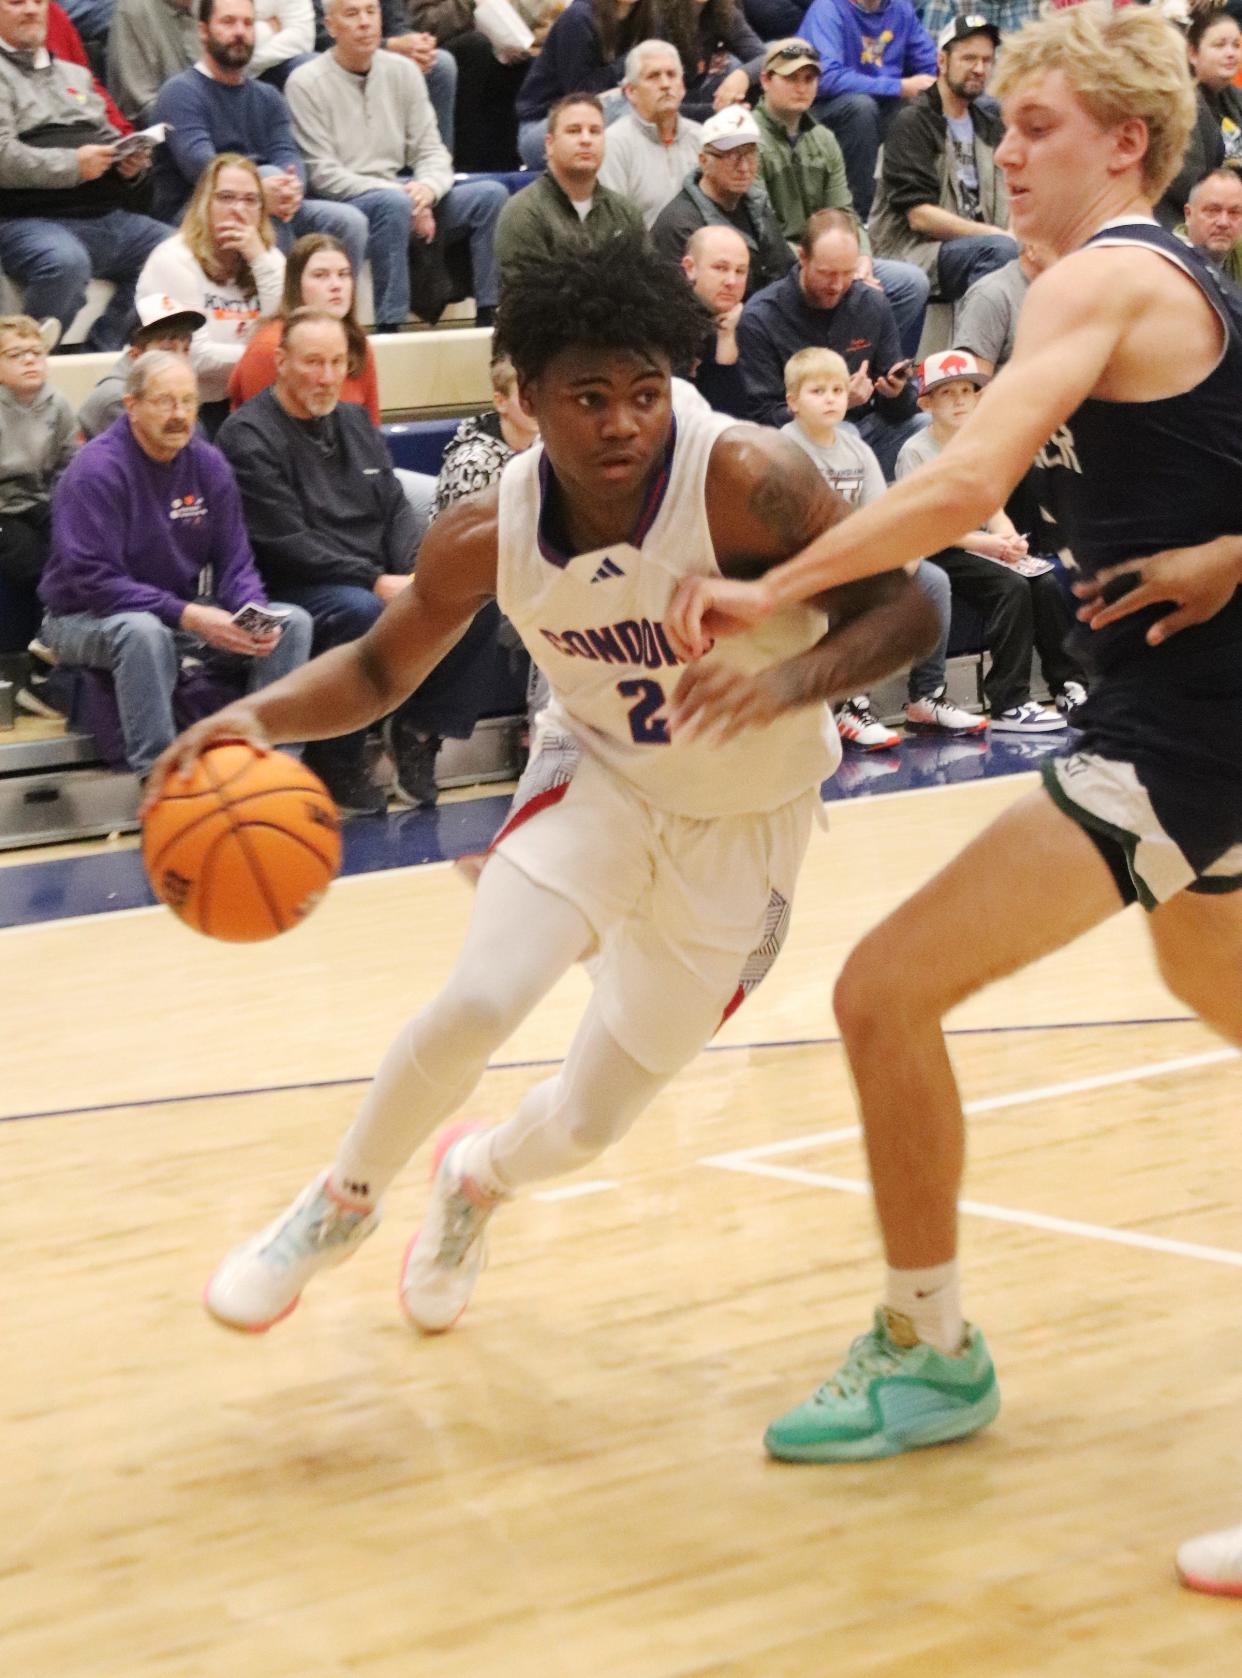 Curie's Carlos Harris III, shown here in the semifinal round against New Trier, came up big in leading the Condors to the title of the 92nd Pontiac Holiday Tournament. Harris was named the AC Williamson Award winner as the most outstanding player in the tournament.